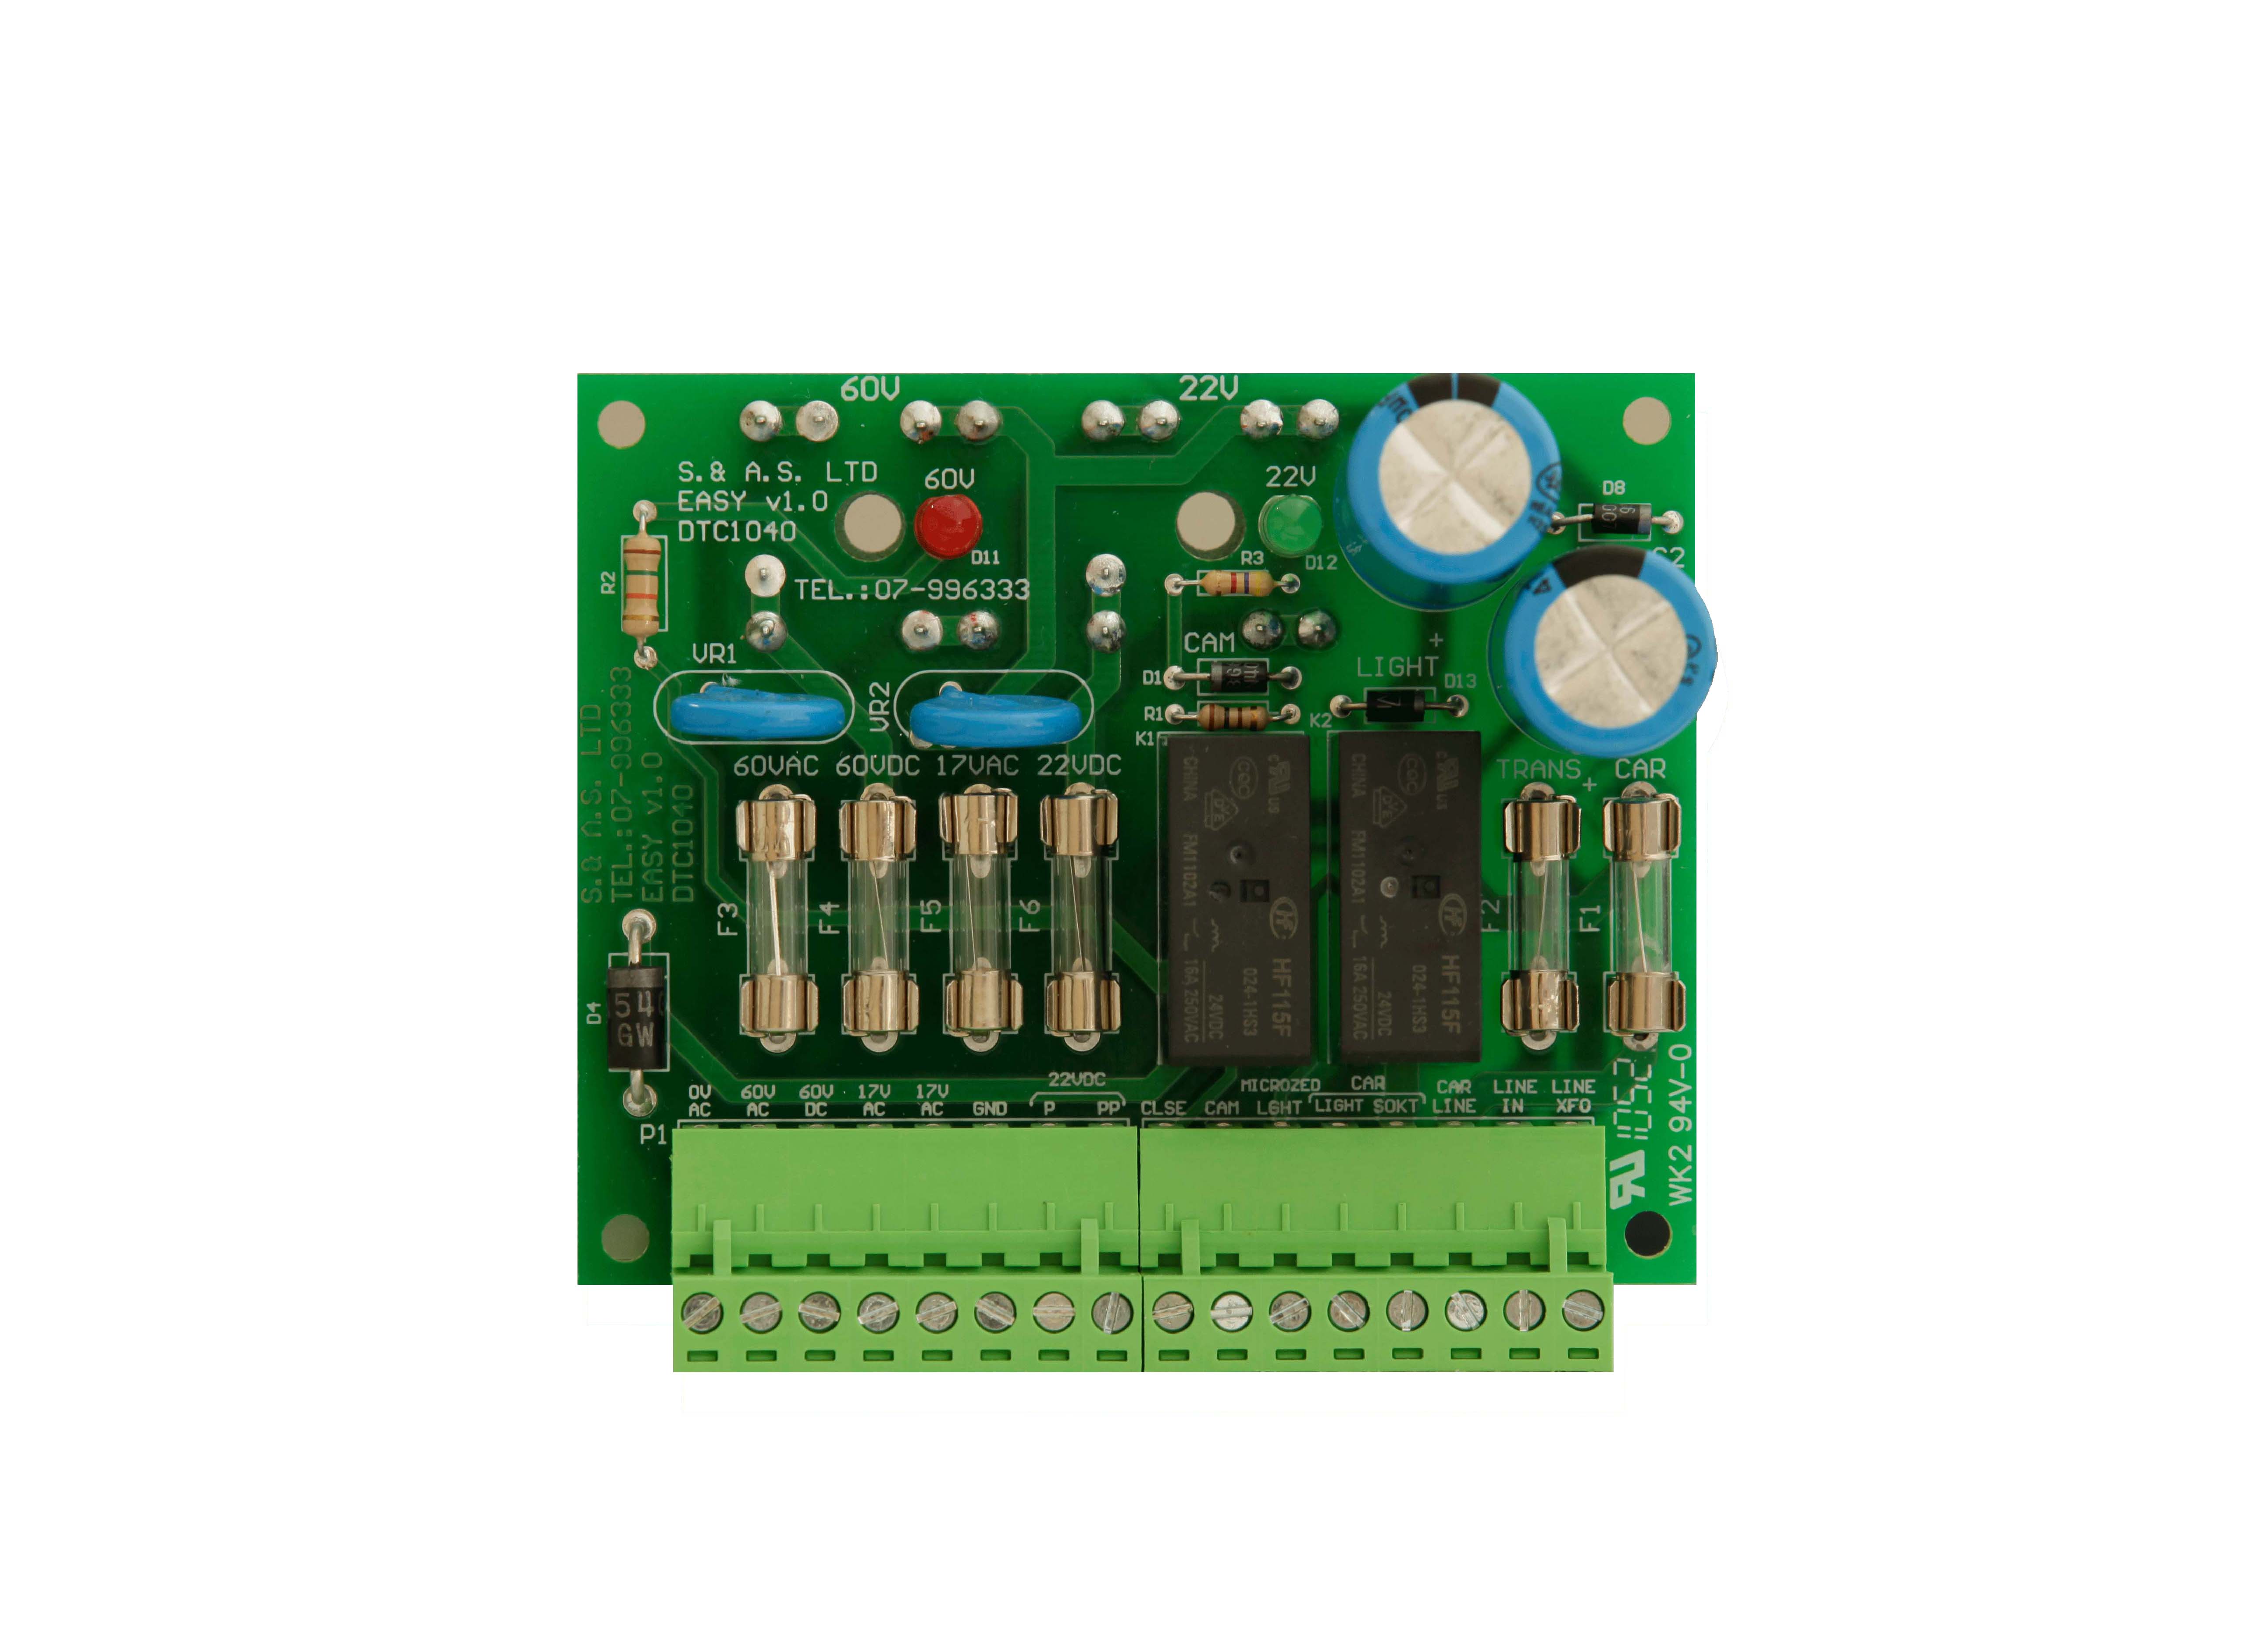 RECTIFIER  BOARD FOR  DC  SUPPLIES WITH  FUSES AND RELAYS</br>EASY